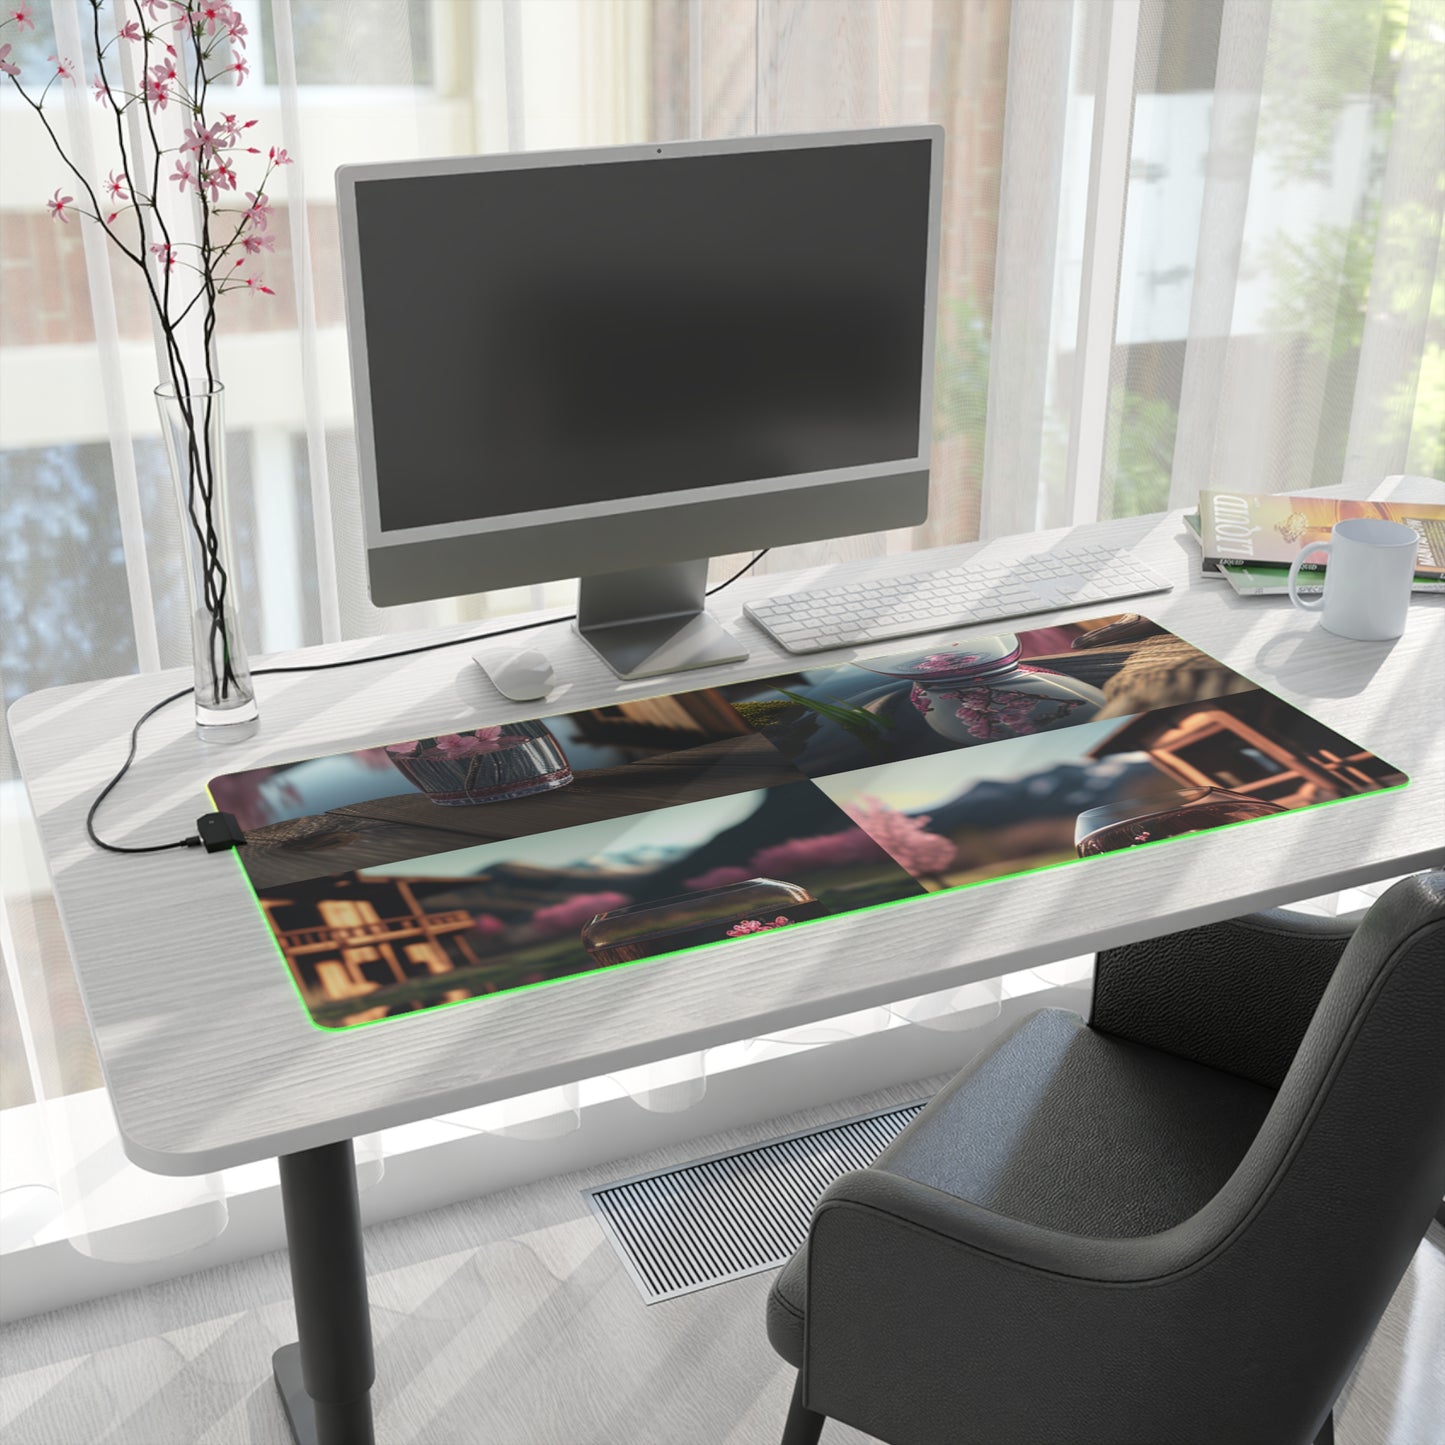 LED Gaming Mouse Pad Cherry Blossom 5